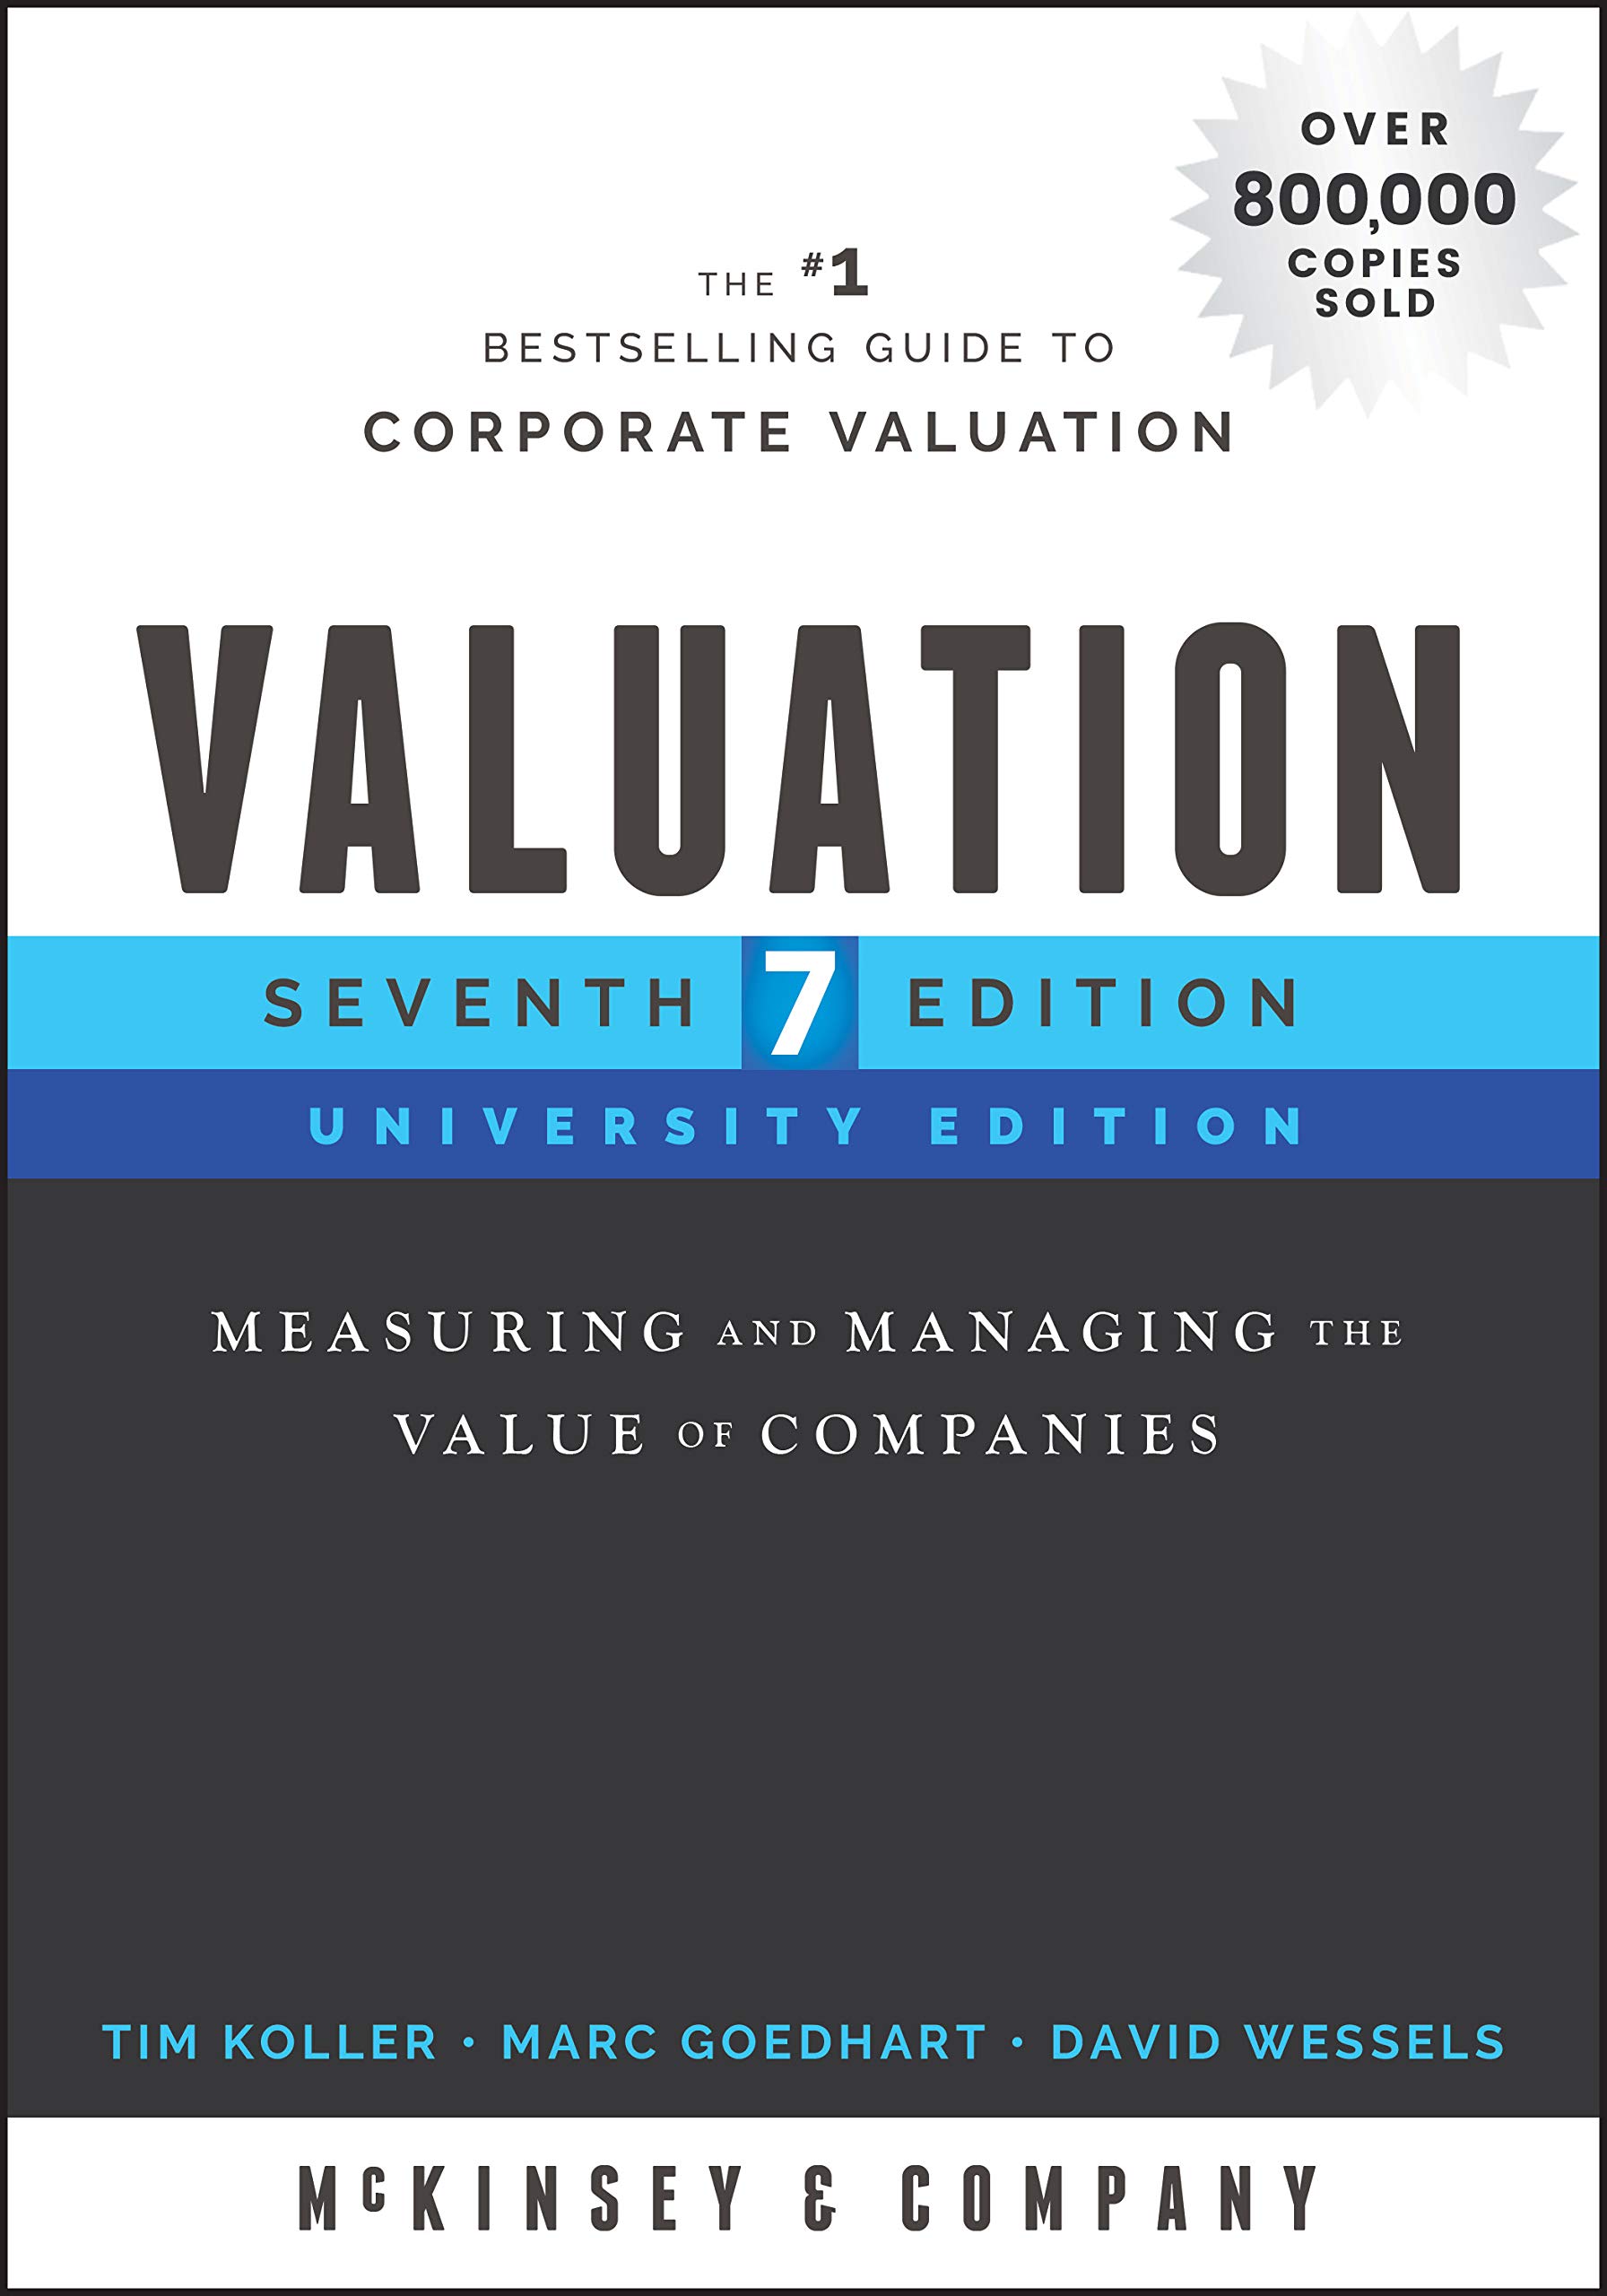 Valuation: Measuring and Managing the Value of Companies, University Edition (Wiley Finance)